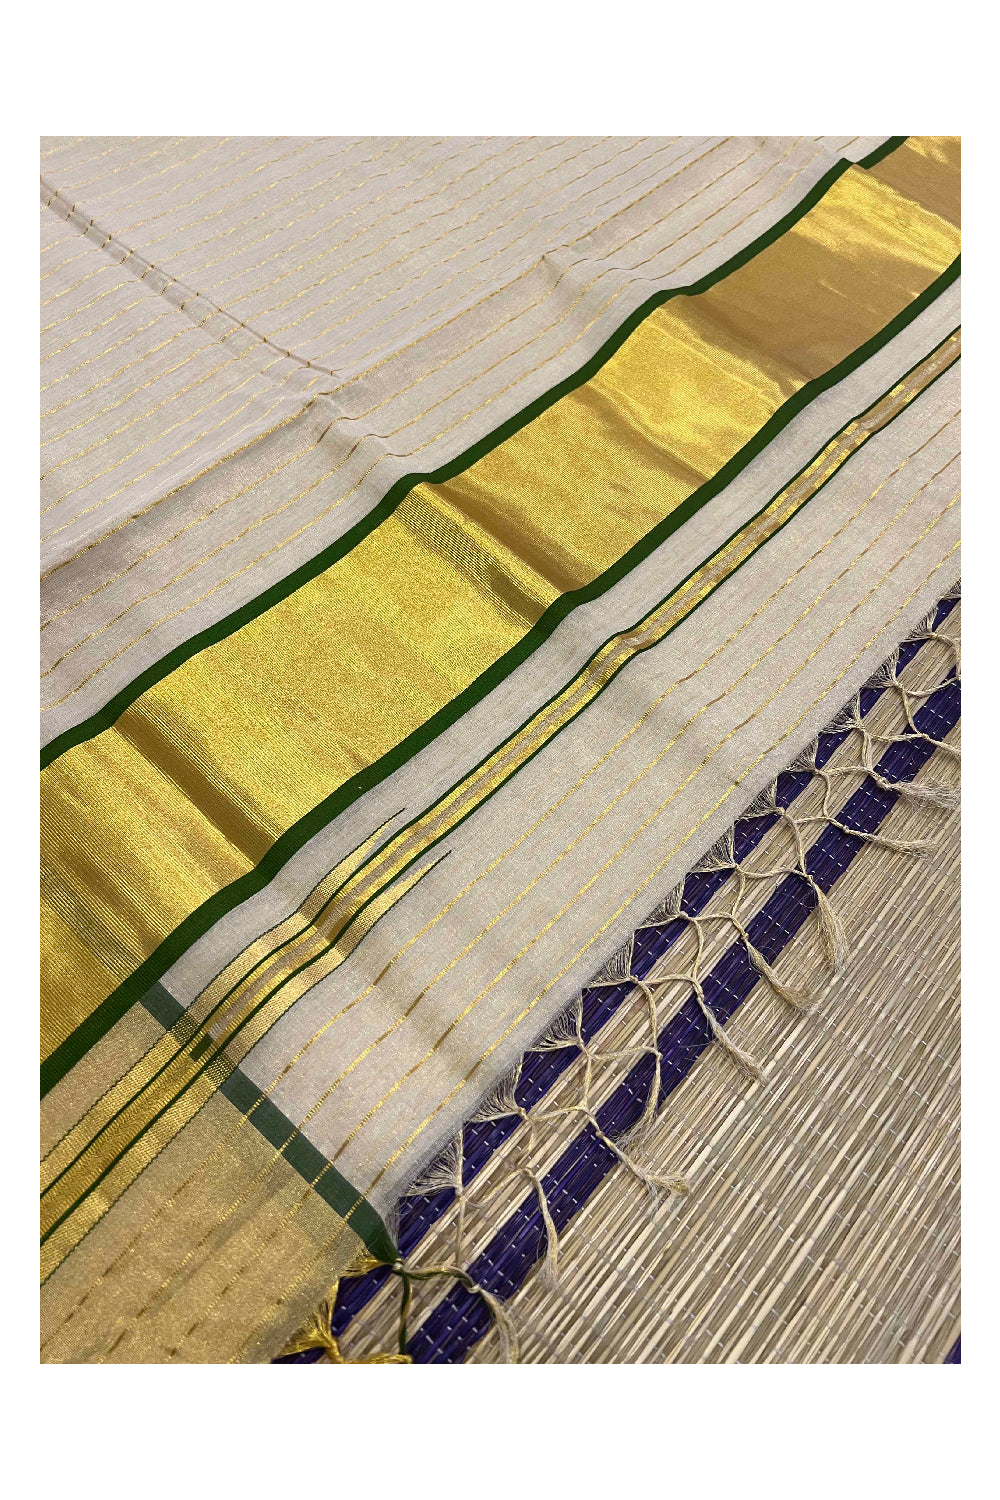 Southloom Premium Kuthampully Handloom Stripes Work Tissue Saree with Green Border